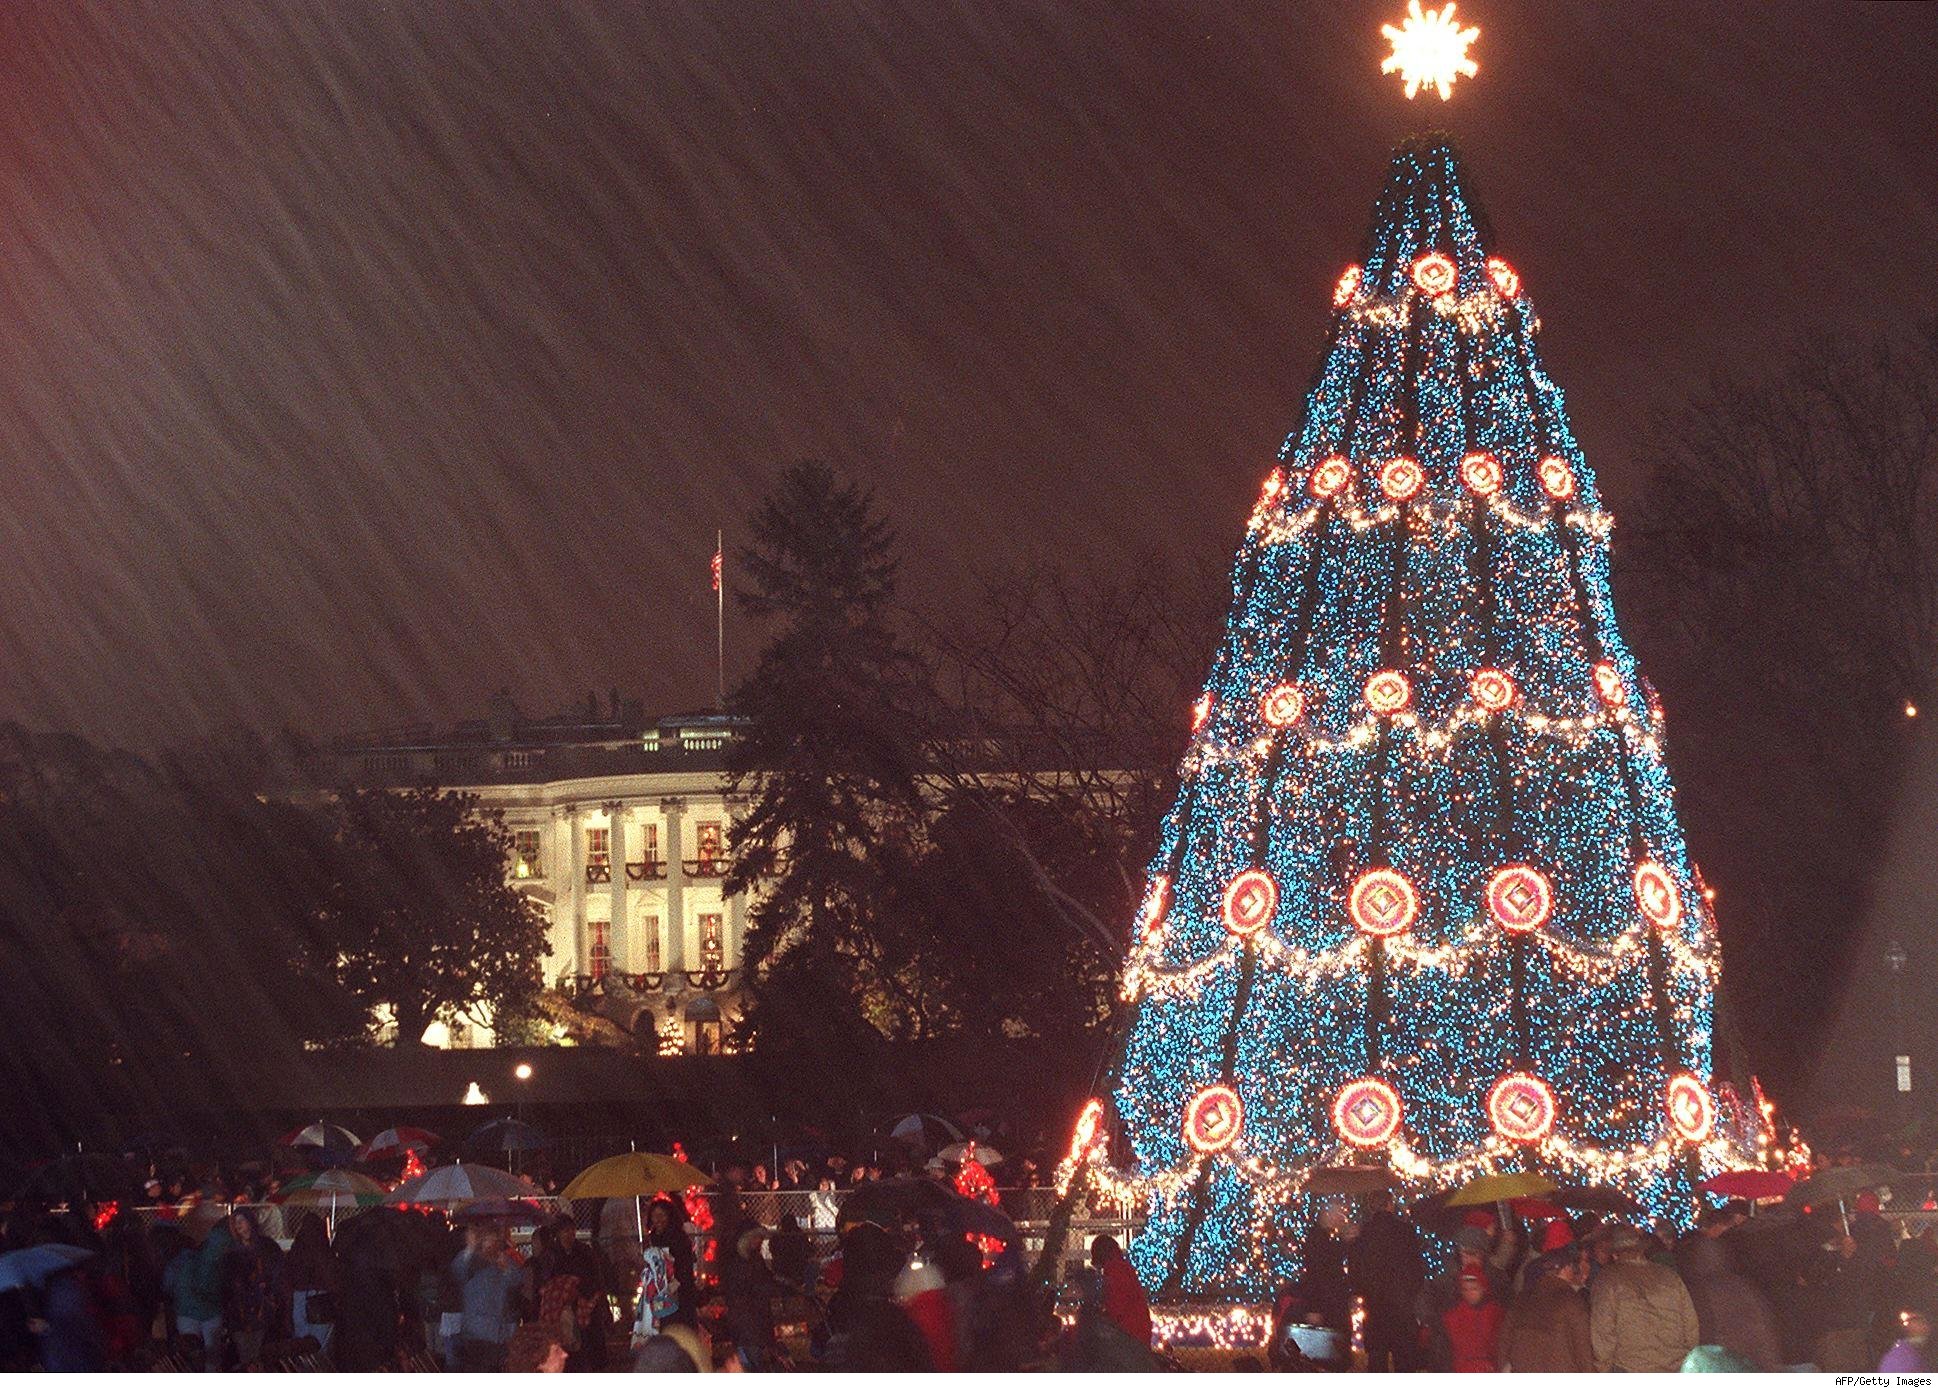 The National Christmas Tree after being lit by President Clinton in 1997. APGetty